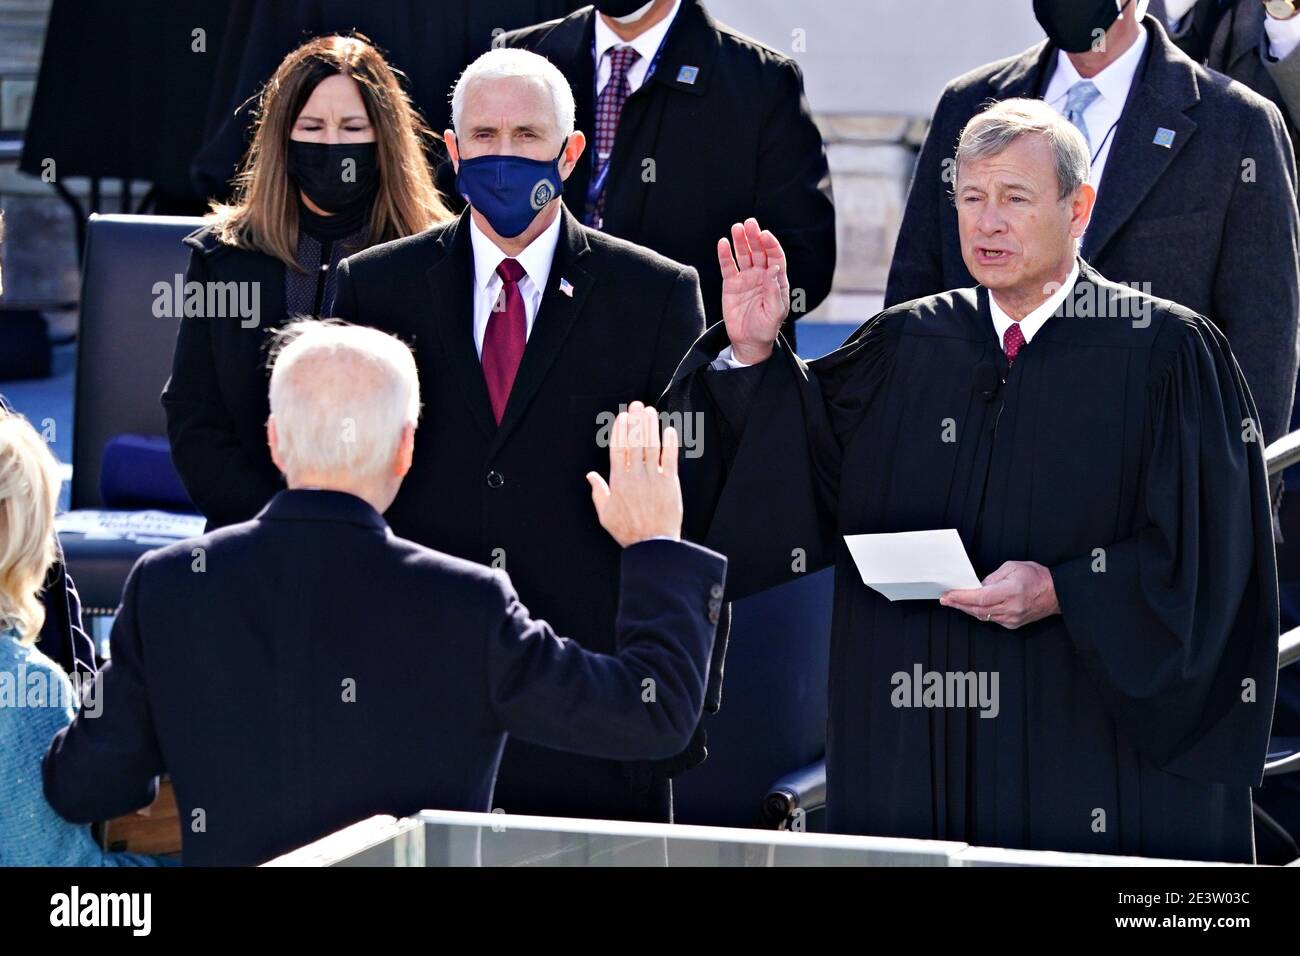 Washington, DC. 20th Jan, 2021.John Roberts, chief justice of the U.S. Supreme Court, right, administers the oath of office to U..S. President-elect Joe Biden, second left, during the 59th presidential inauguration in Washington, D.C., U.S., on Wednesday, Jan. 20, 2021. Biden will propose a broad immigration overhaul on his first day as president, including a shortened pathway to U.S. citizenship for undocumented migrants - a complete reversal from Donald Trump's immigration restrictions and crackdowns, but one that faces major roadblocks in Congress. Photographer: Kevin Dietsch/UPI | usage wo Stock Photo